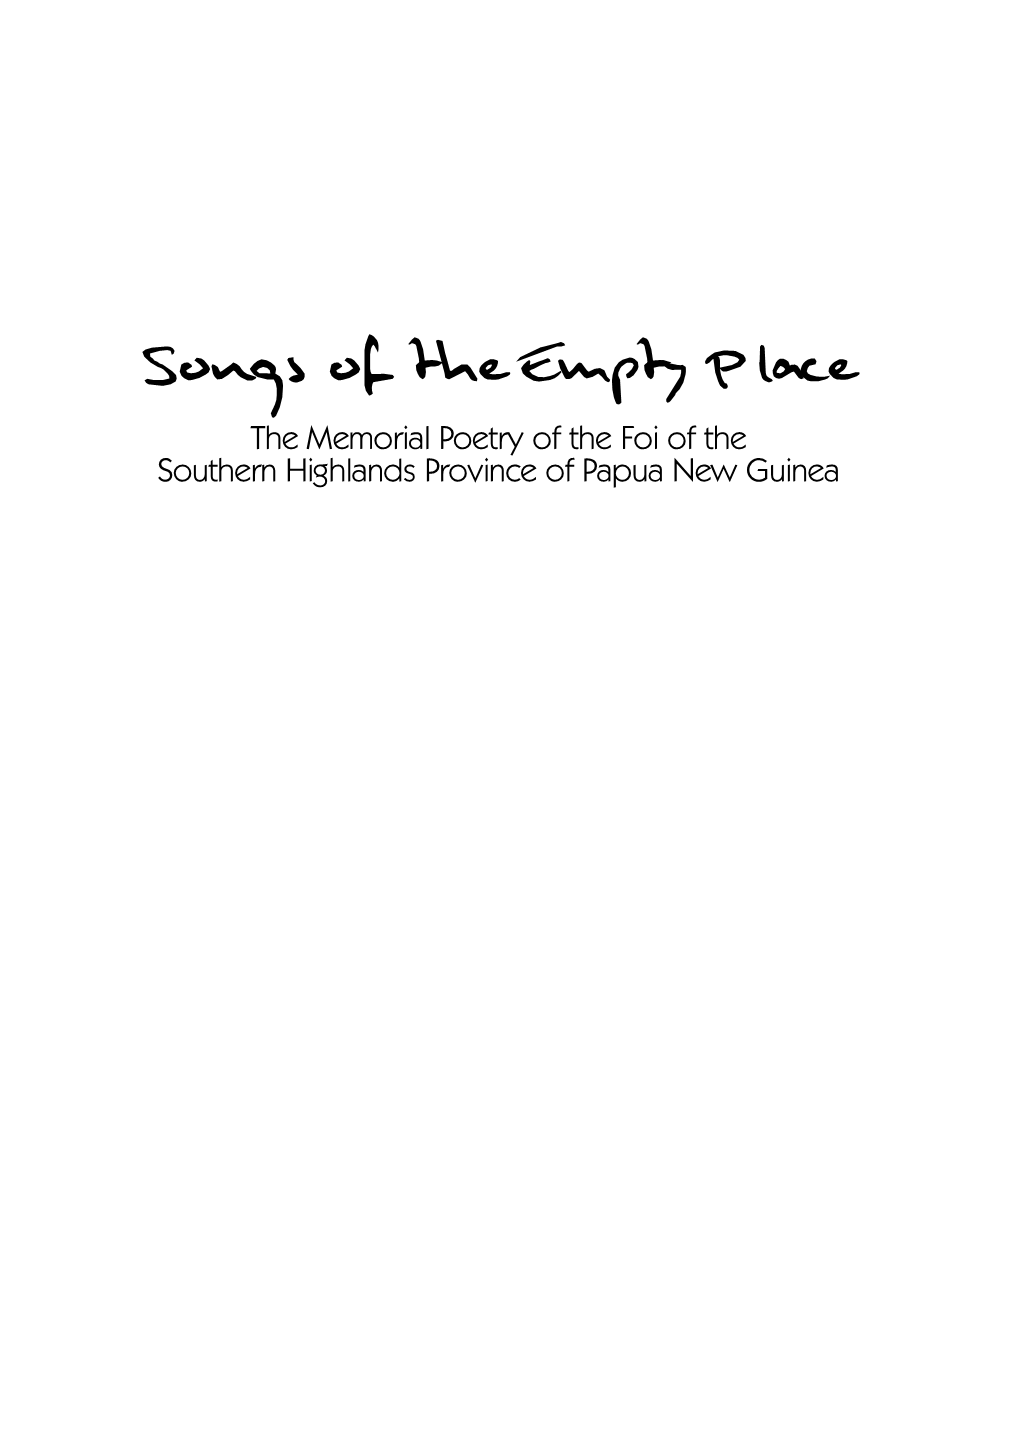 Songs of the Empty Place the Memorial Poetry of the Foi of the Southern Highlands Province of Papua New Guinea